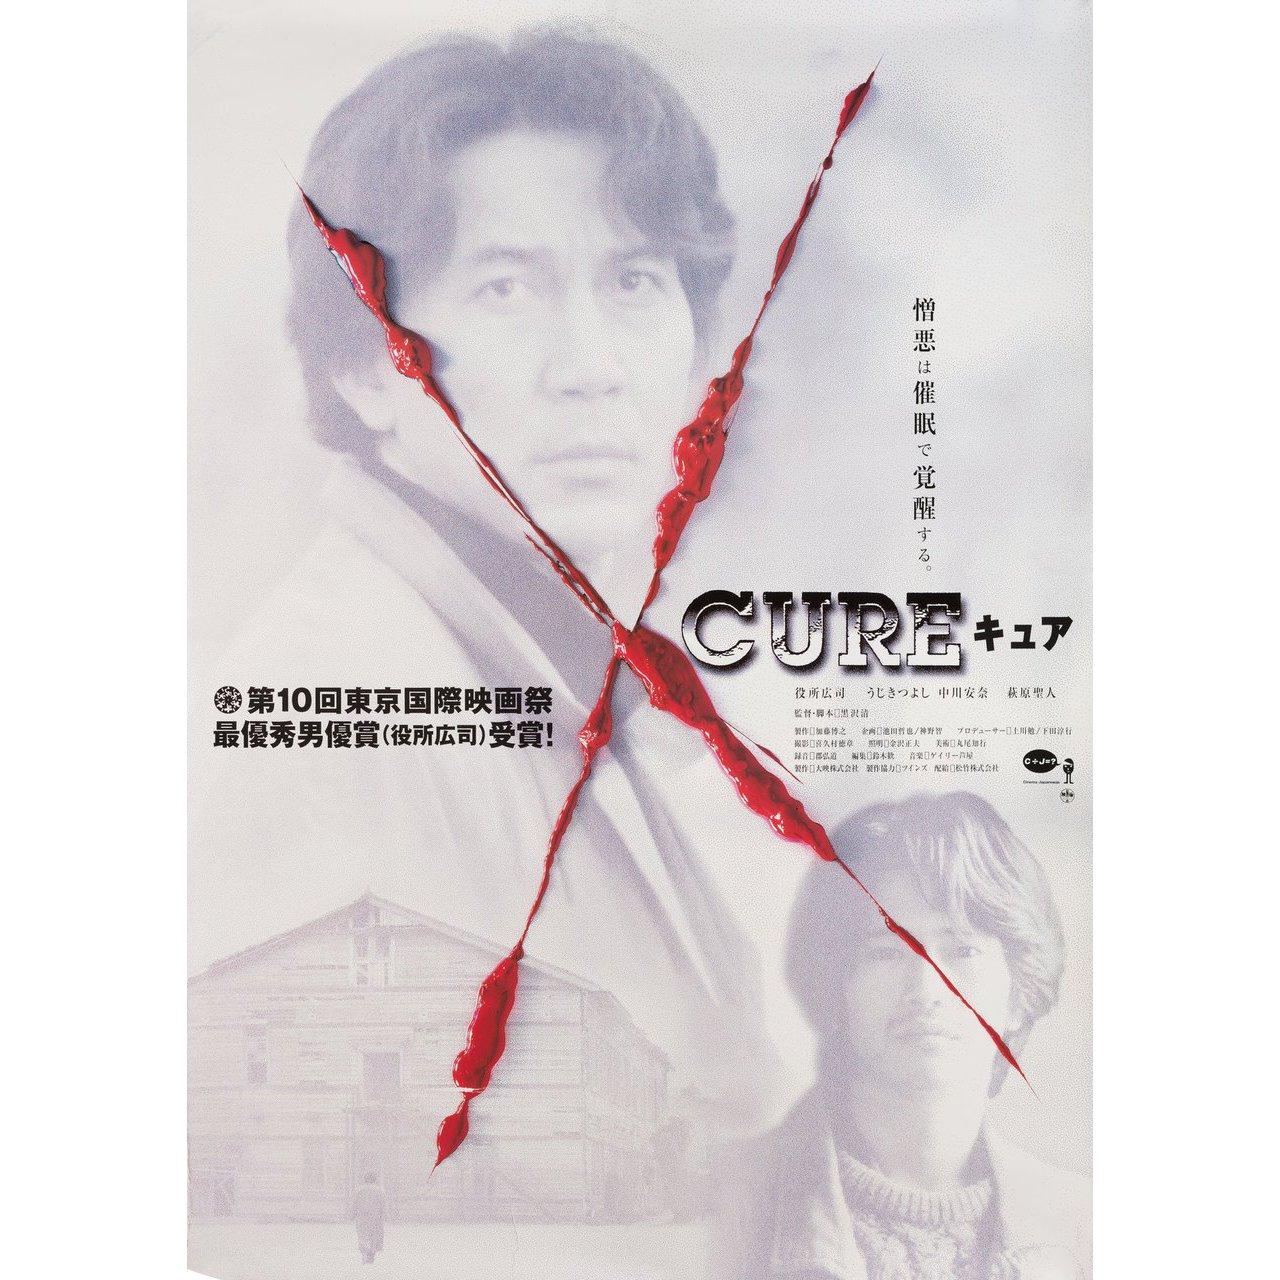 cure 1997 poster